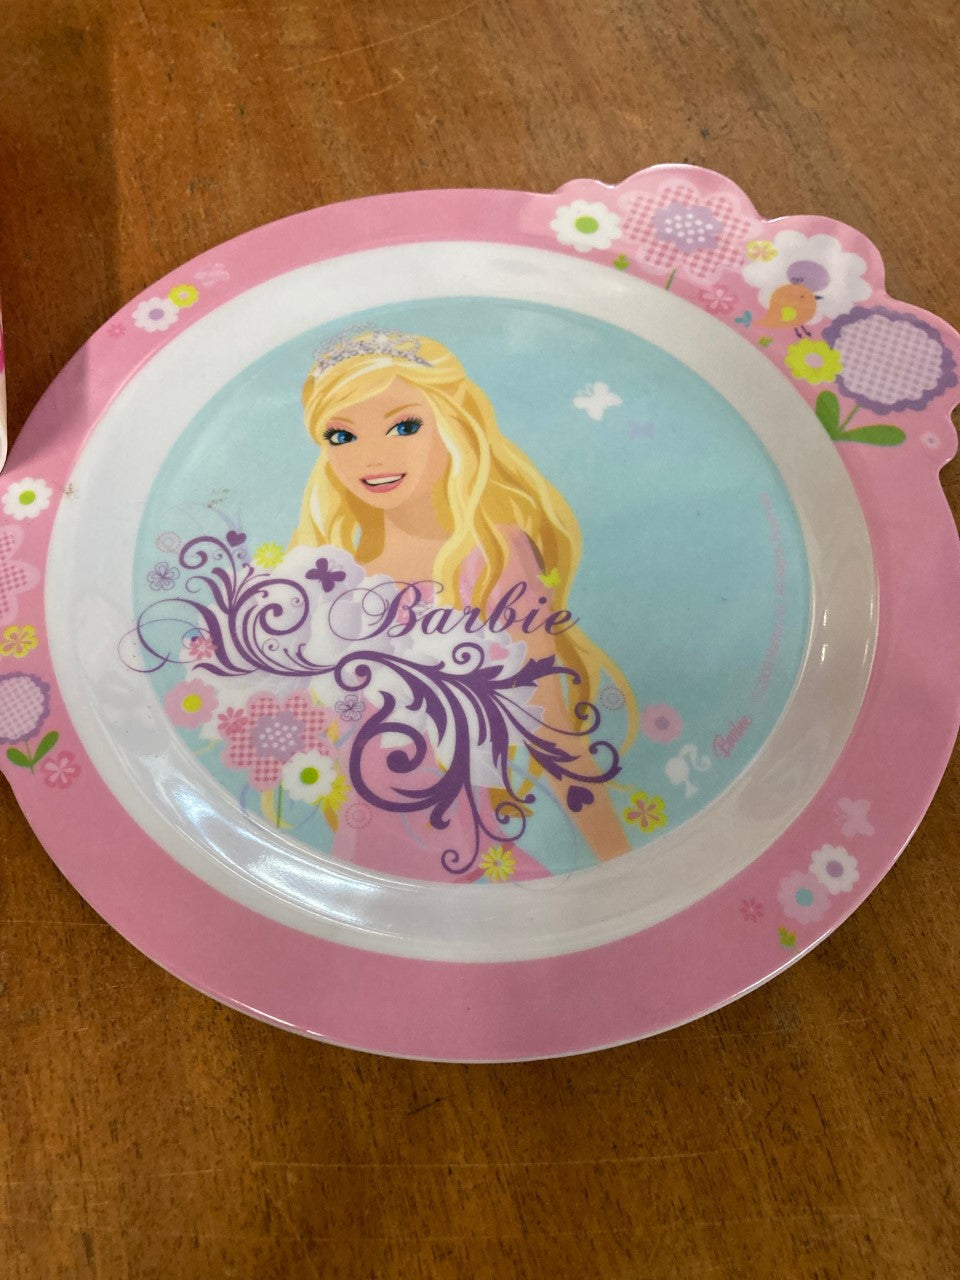 Girls Barbie Plate Bowl And Tumbler Set Great For Kids x20 sets